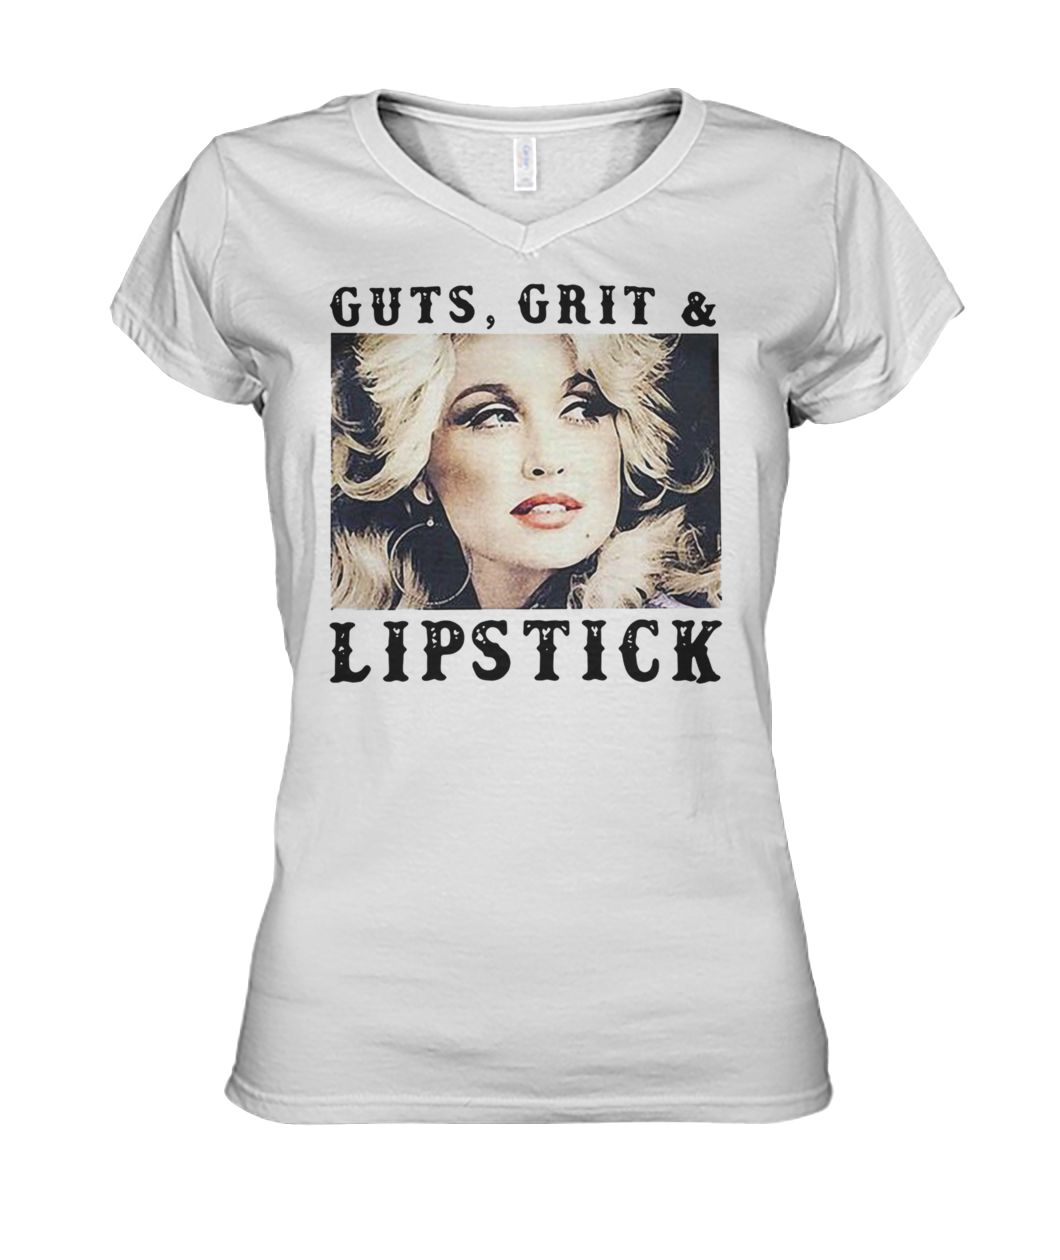 Dolly parton guts grits and lipstick women's v-neck